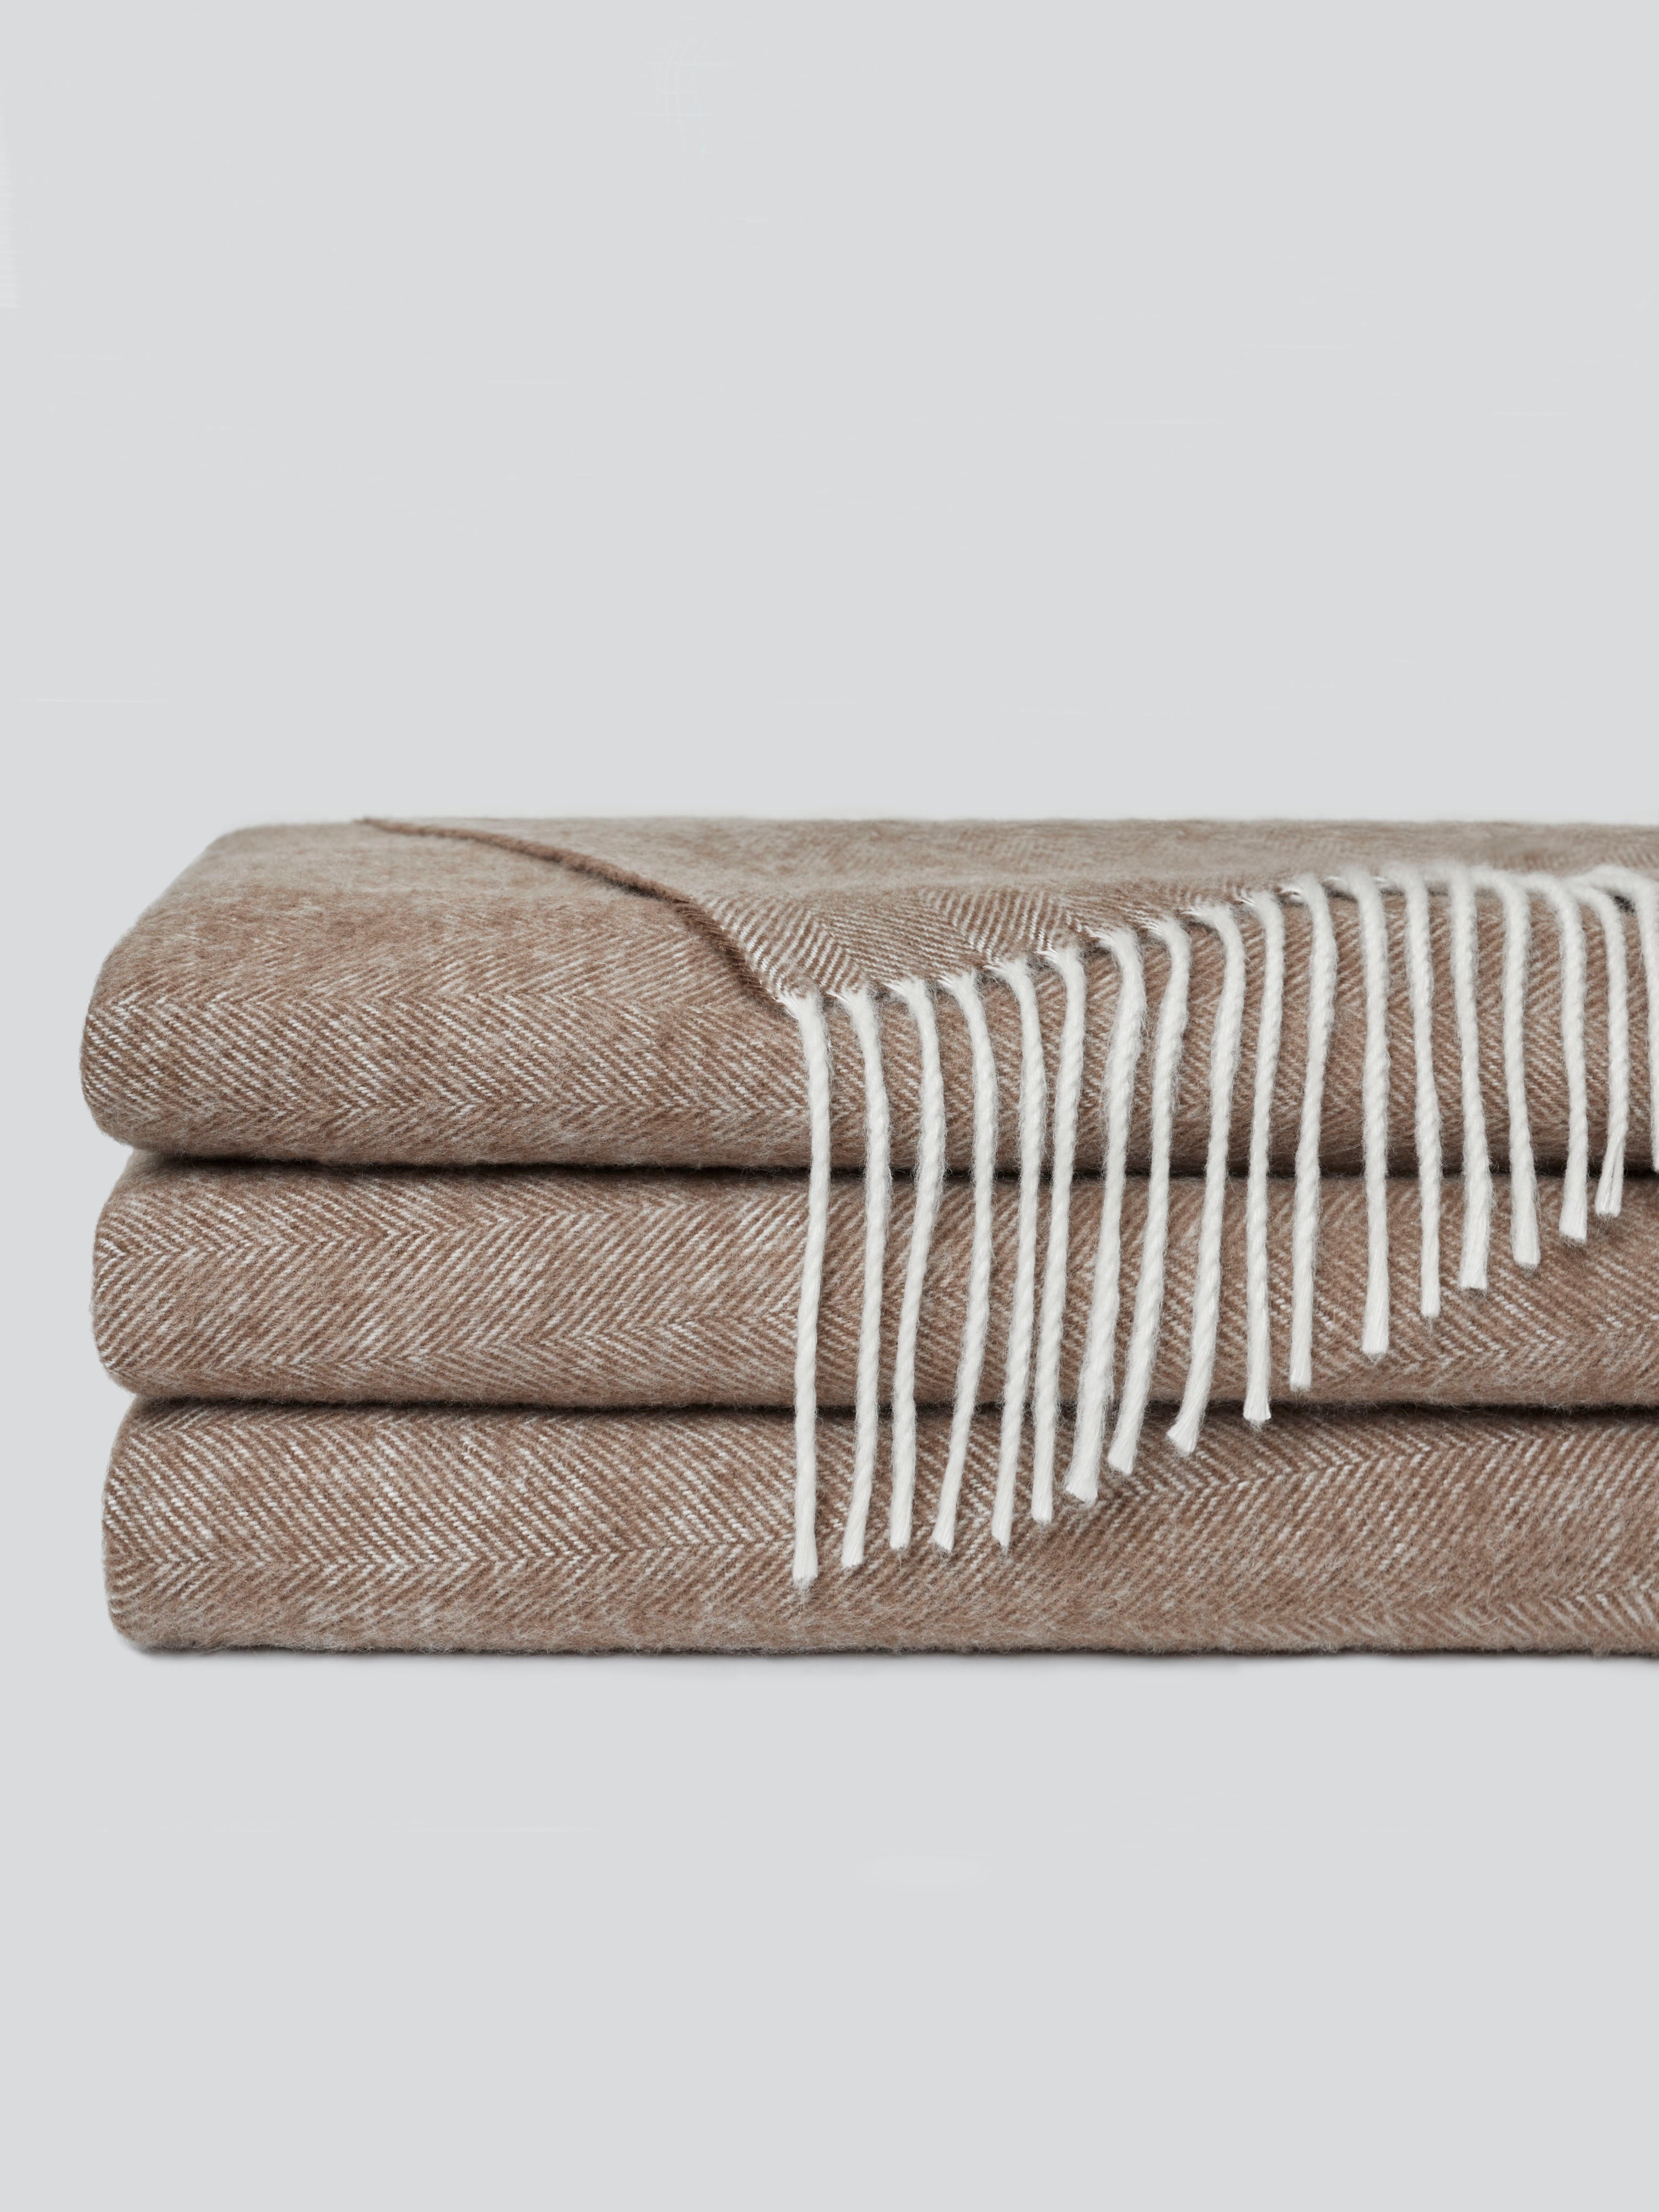 Truffle tassel throw folded with off-white background |Color:Truffle